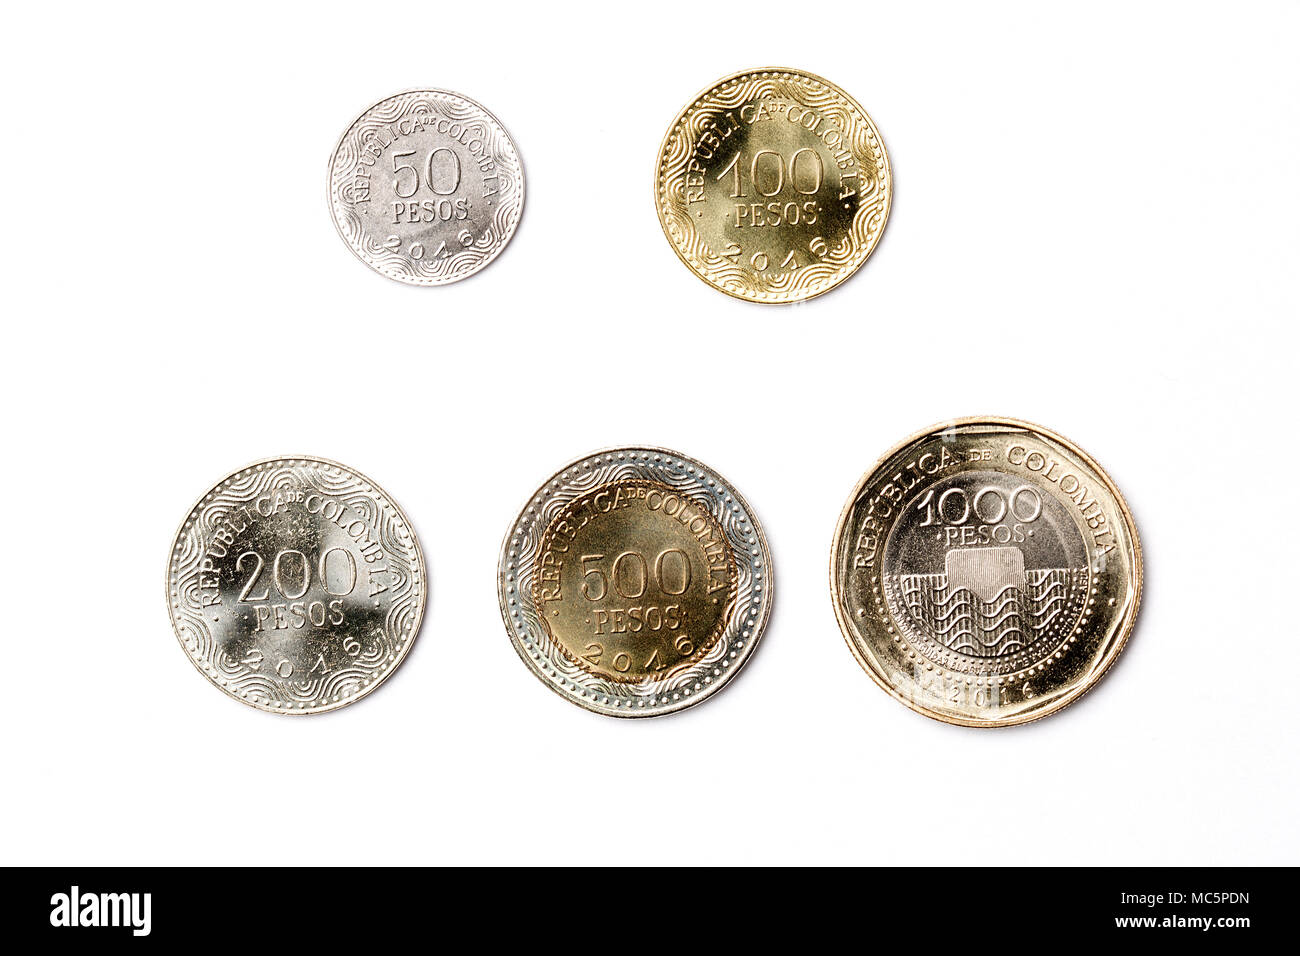 Coins from Colombia on a white background Stock Photo